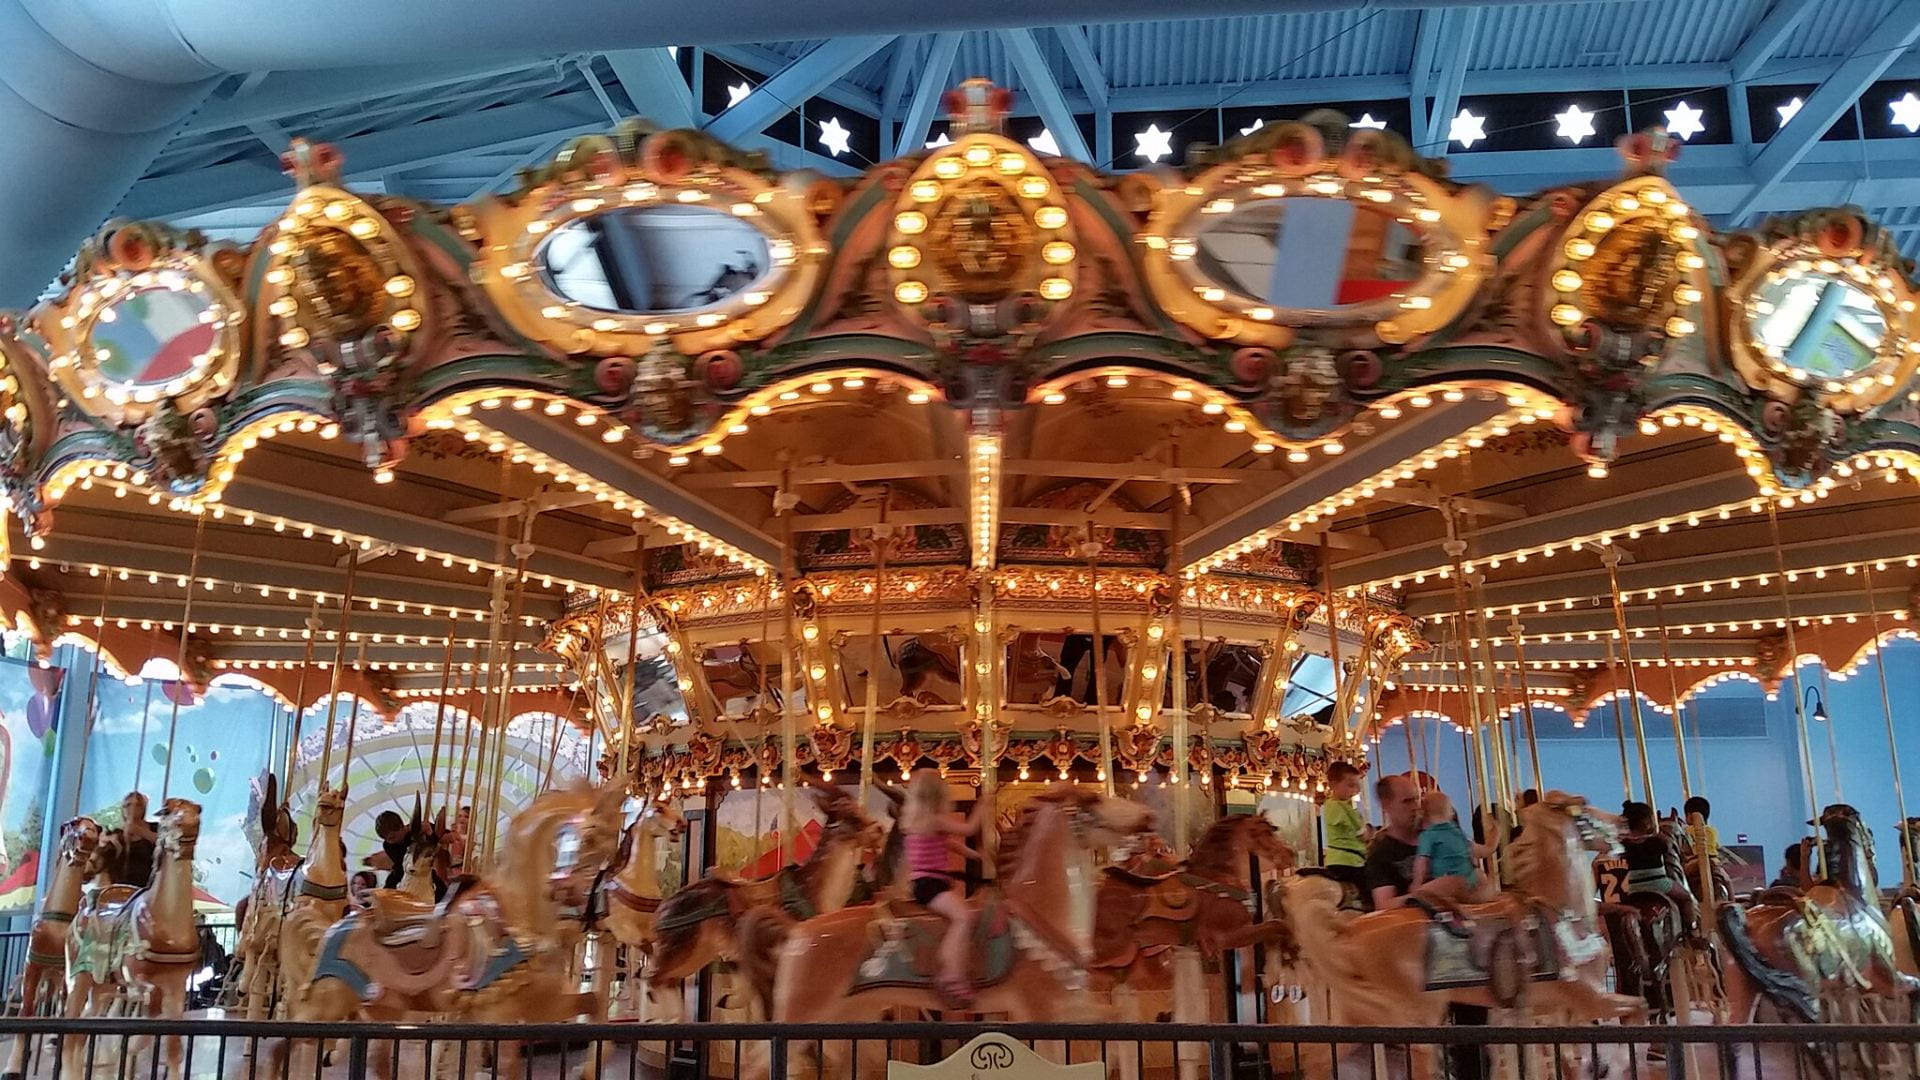 A carousel in motion. Photo by Grace Rodriguez.